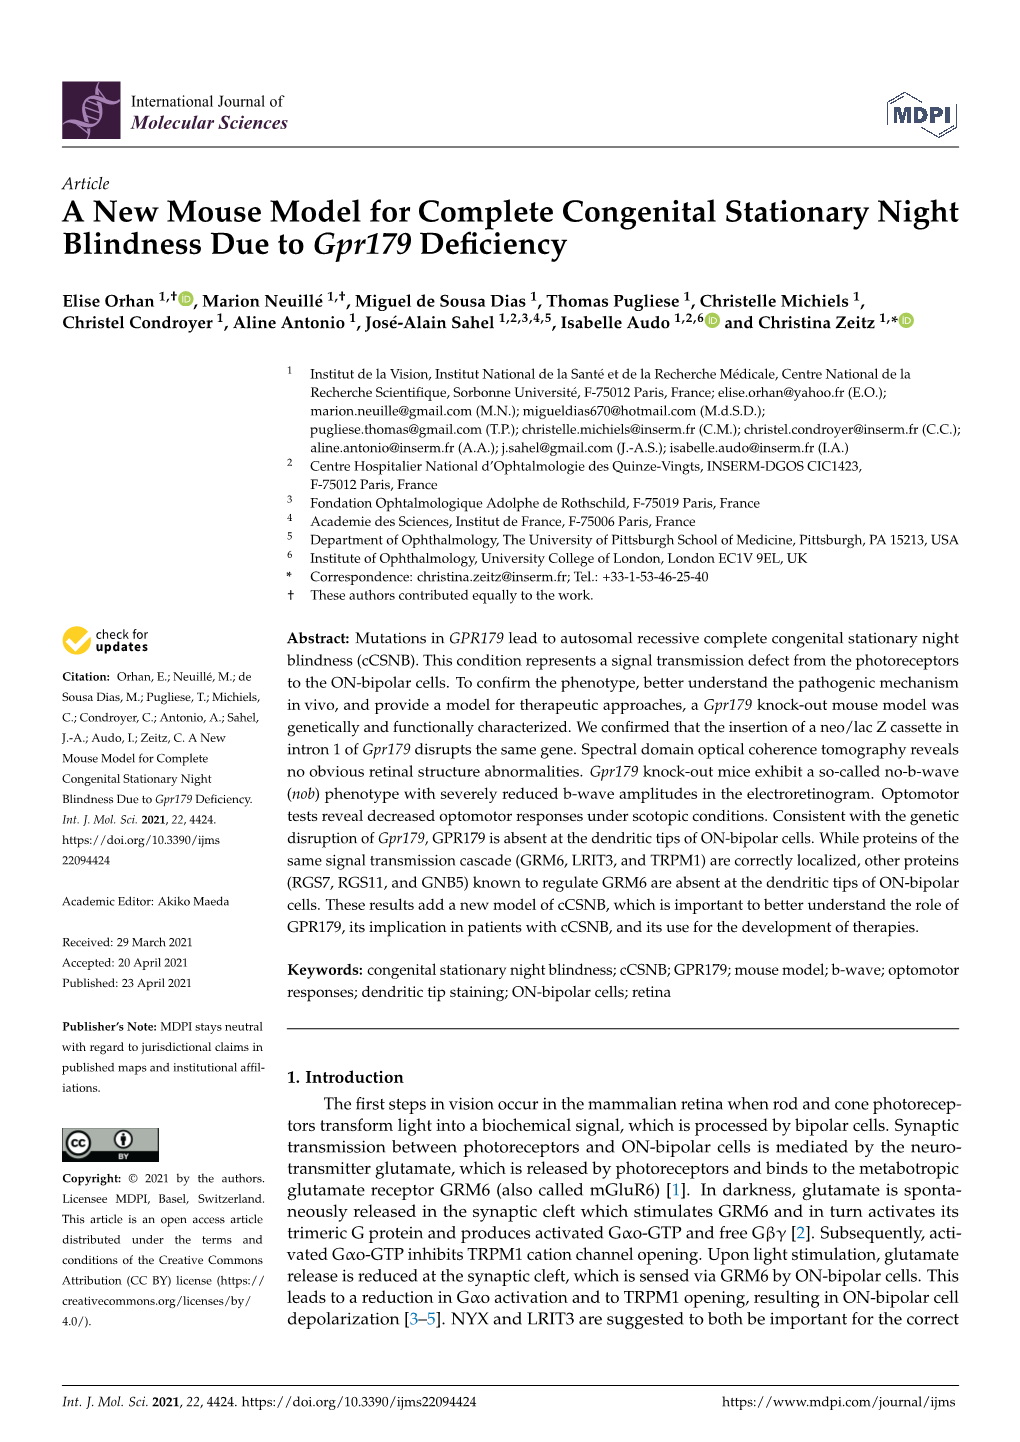 A New Mouse Model for Complete Congenital Stationary Night Blindness Due to Gpr179 Deﬁciency